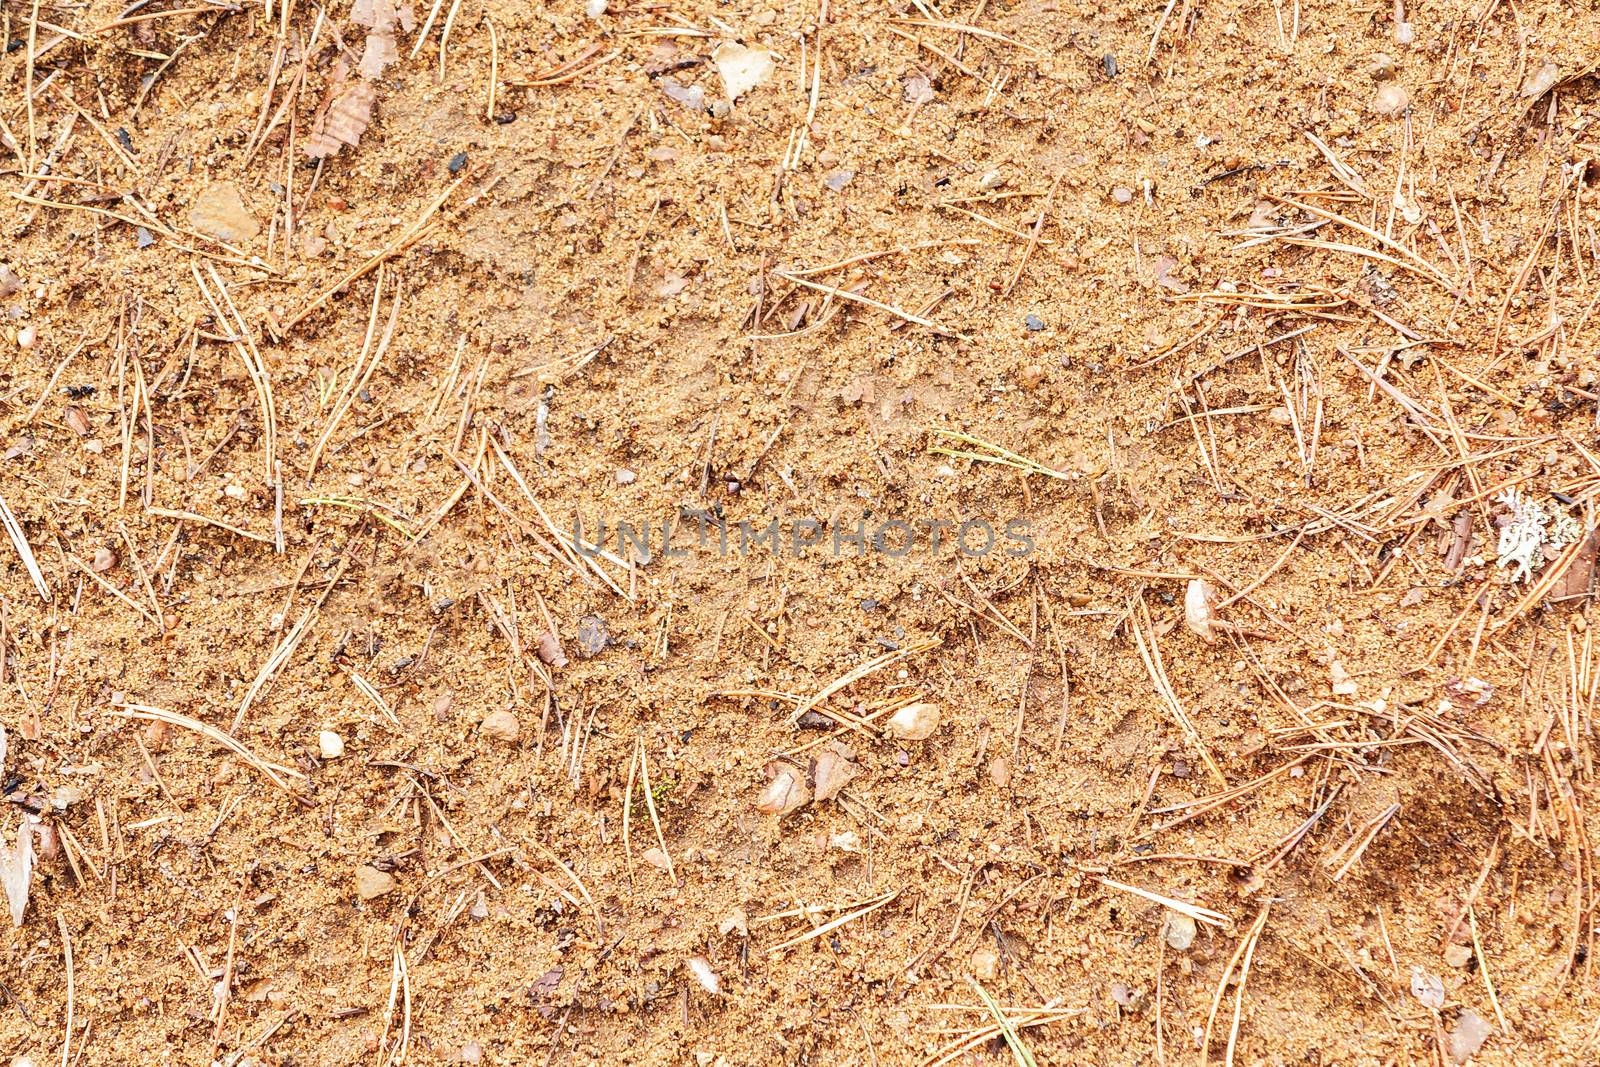 Texture of the forest floor - sand and pine needles.